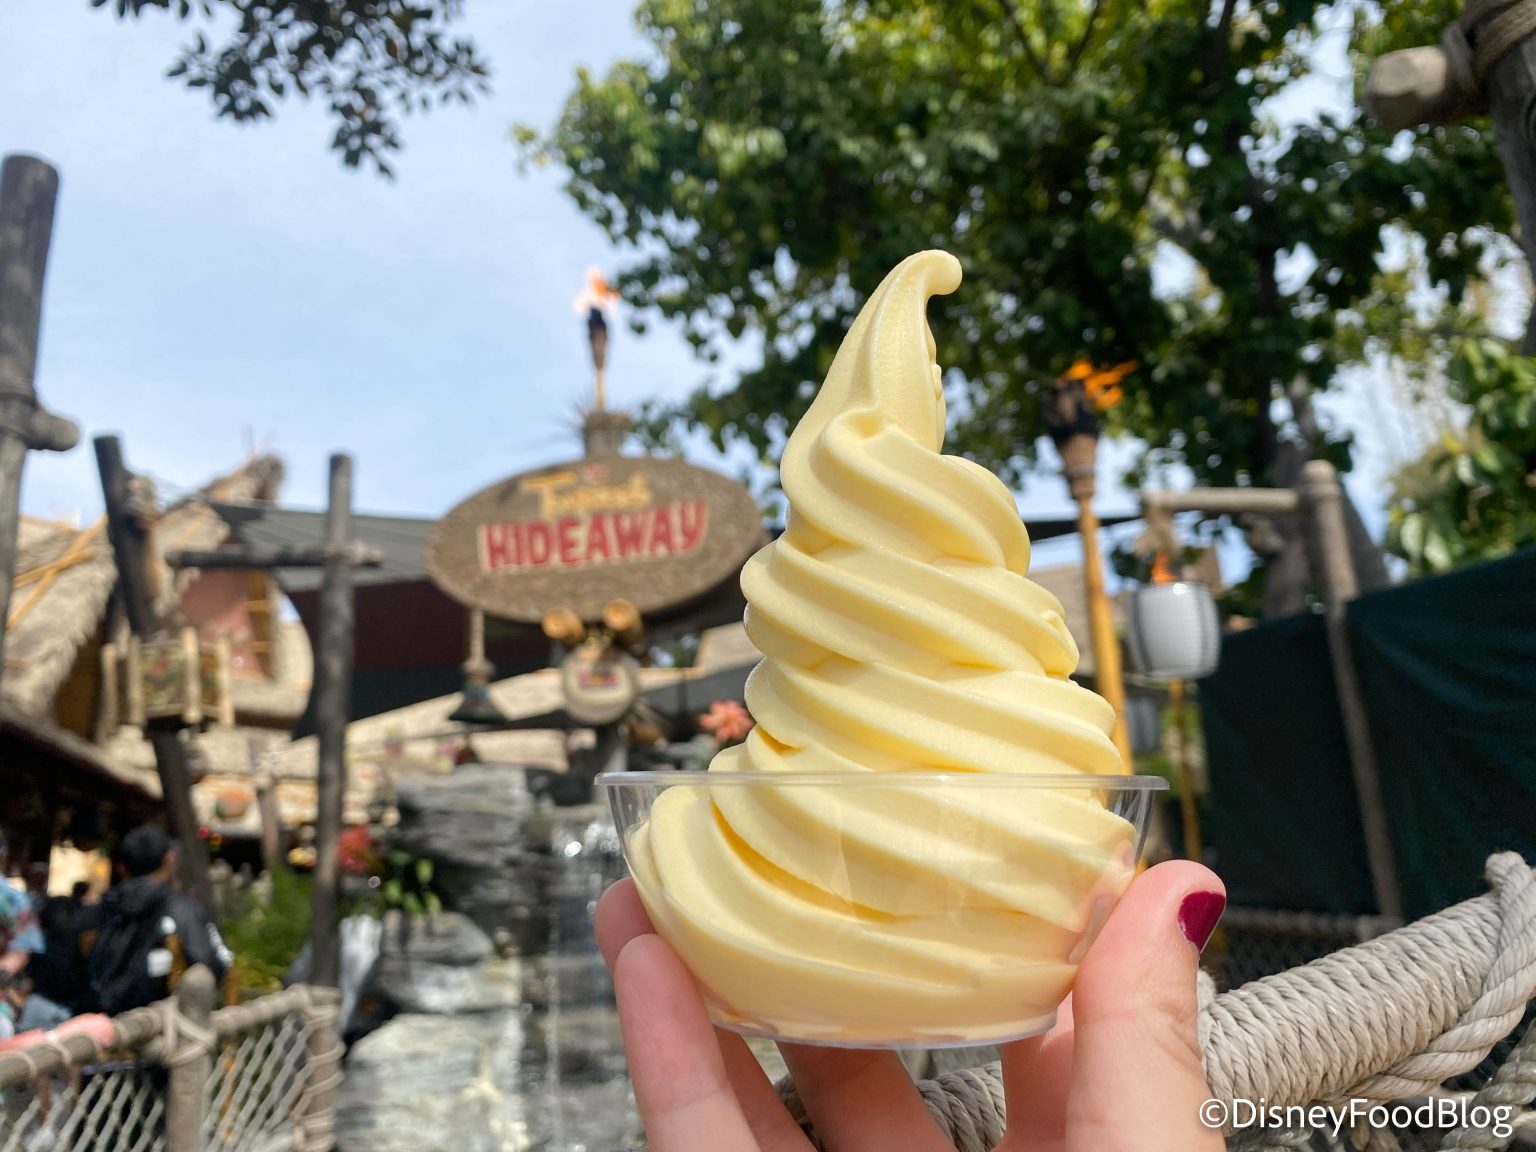 Disney Announces Its First Ever DOLE WHIP DAY! Disney by Mark